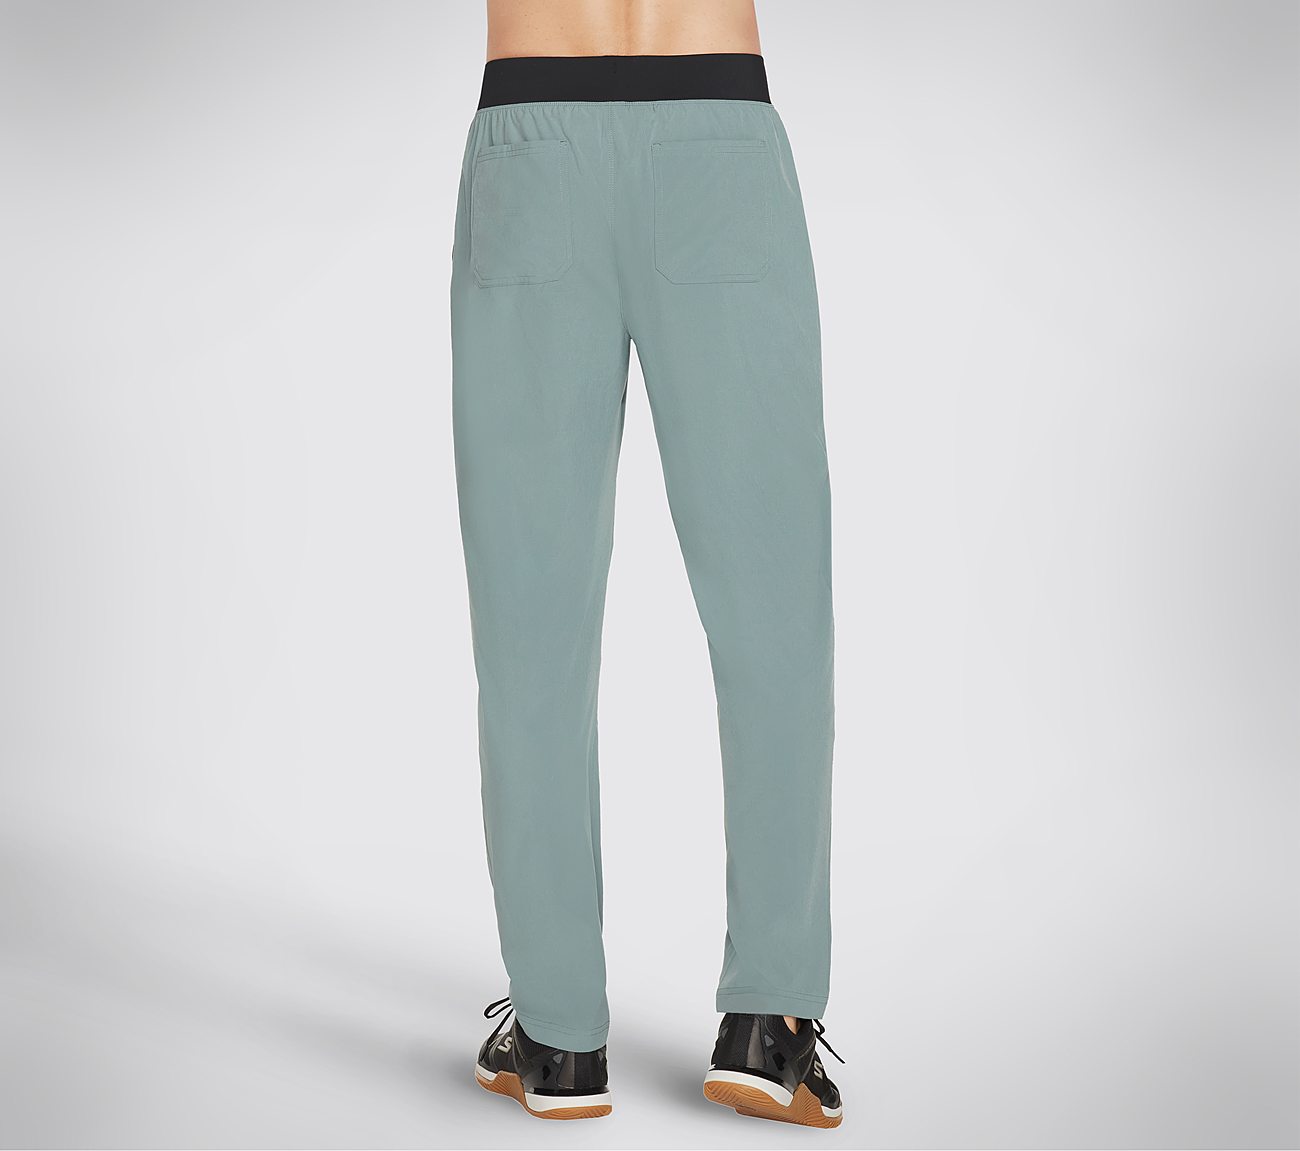 GO WALK ACTION PANT, TEAL/BLUE Apparel Top View